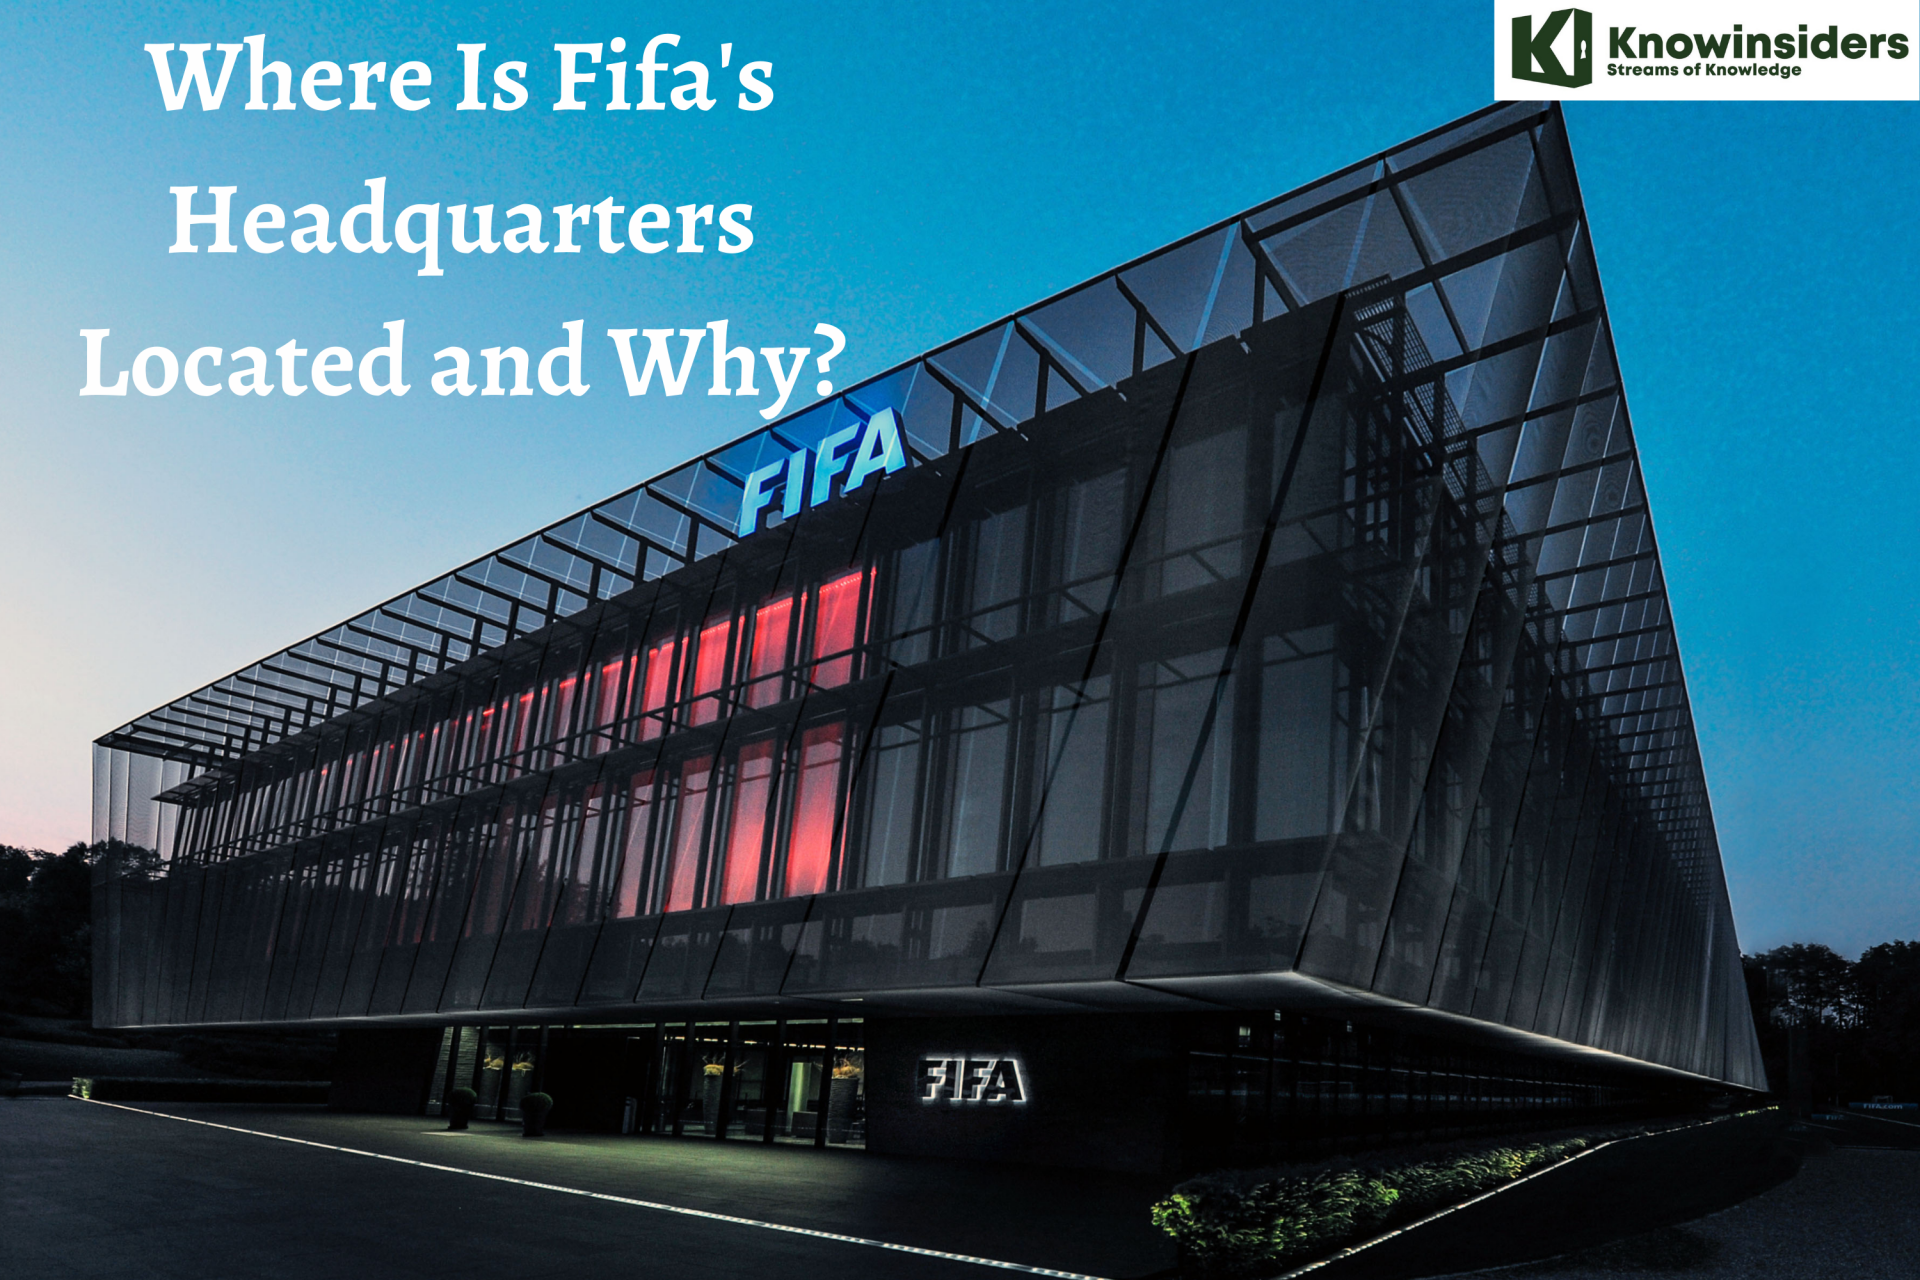 Where Is FIFA Headquarters Located: Zurich or Paris and Why?